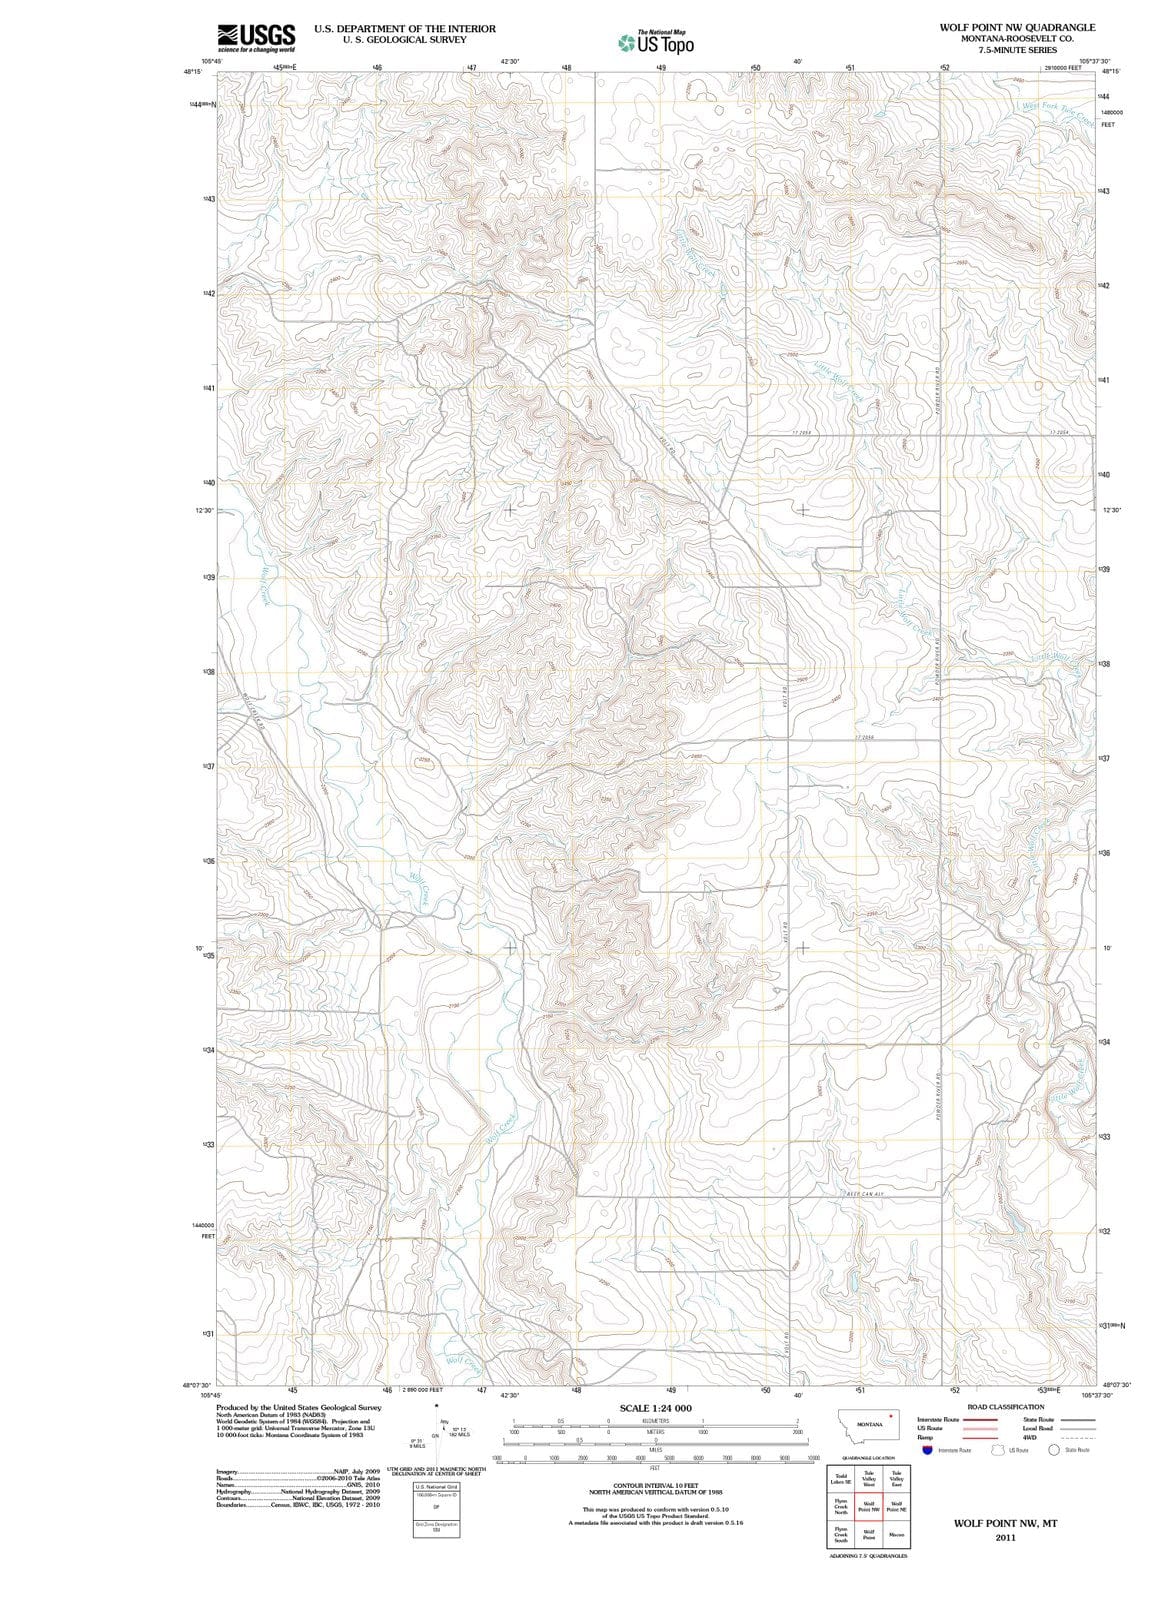 2011 Wolf Point, MT - Montana - USGS Topographic Map - Historic Pictoric